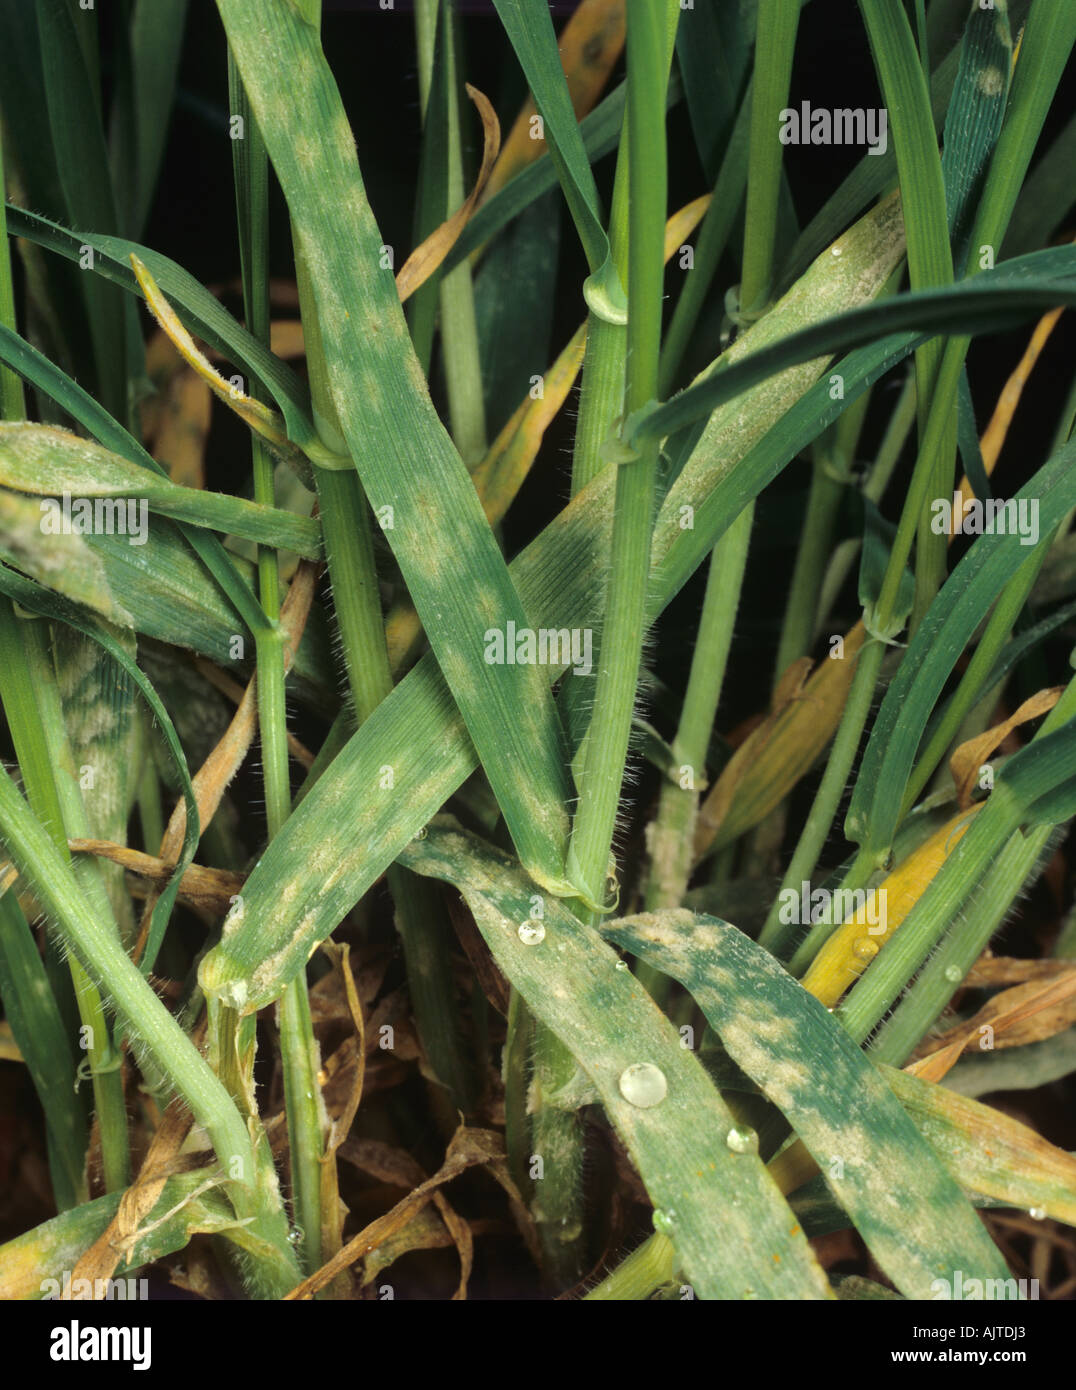 Powdery mildew (Blumeria graminis f.sp. hordei) infection on young barley crop Stock Photo